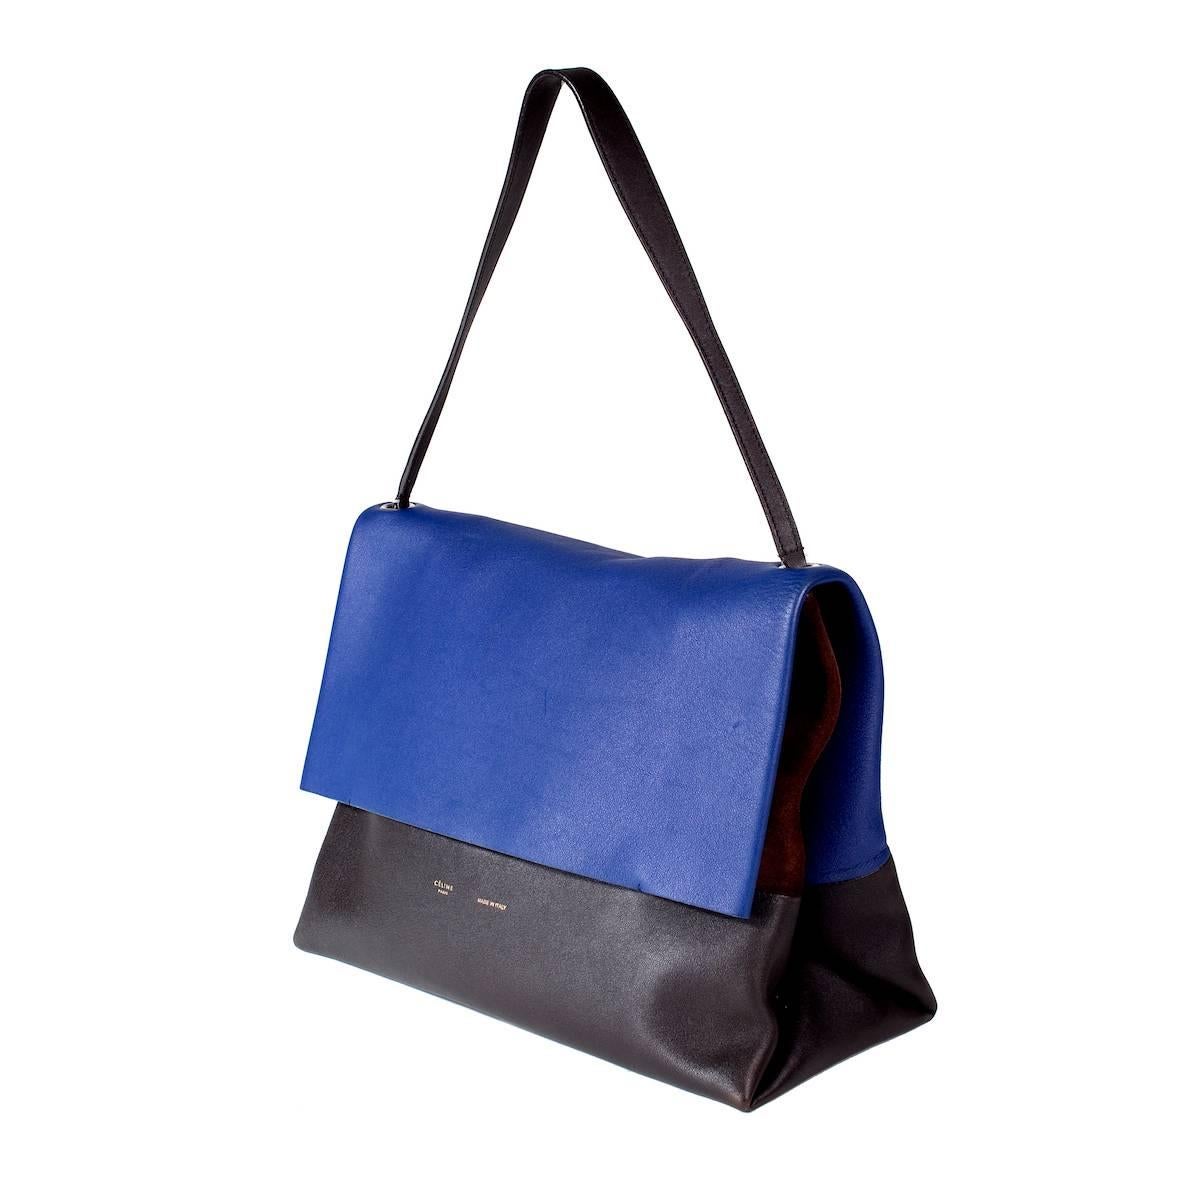 This is a shoulder bag from Celine. Tri-color leather and suede flap bag with matching pouch wallet.  

Bag dimensions:   14